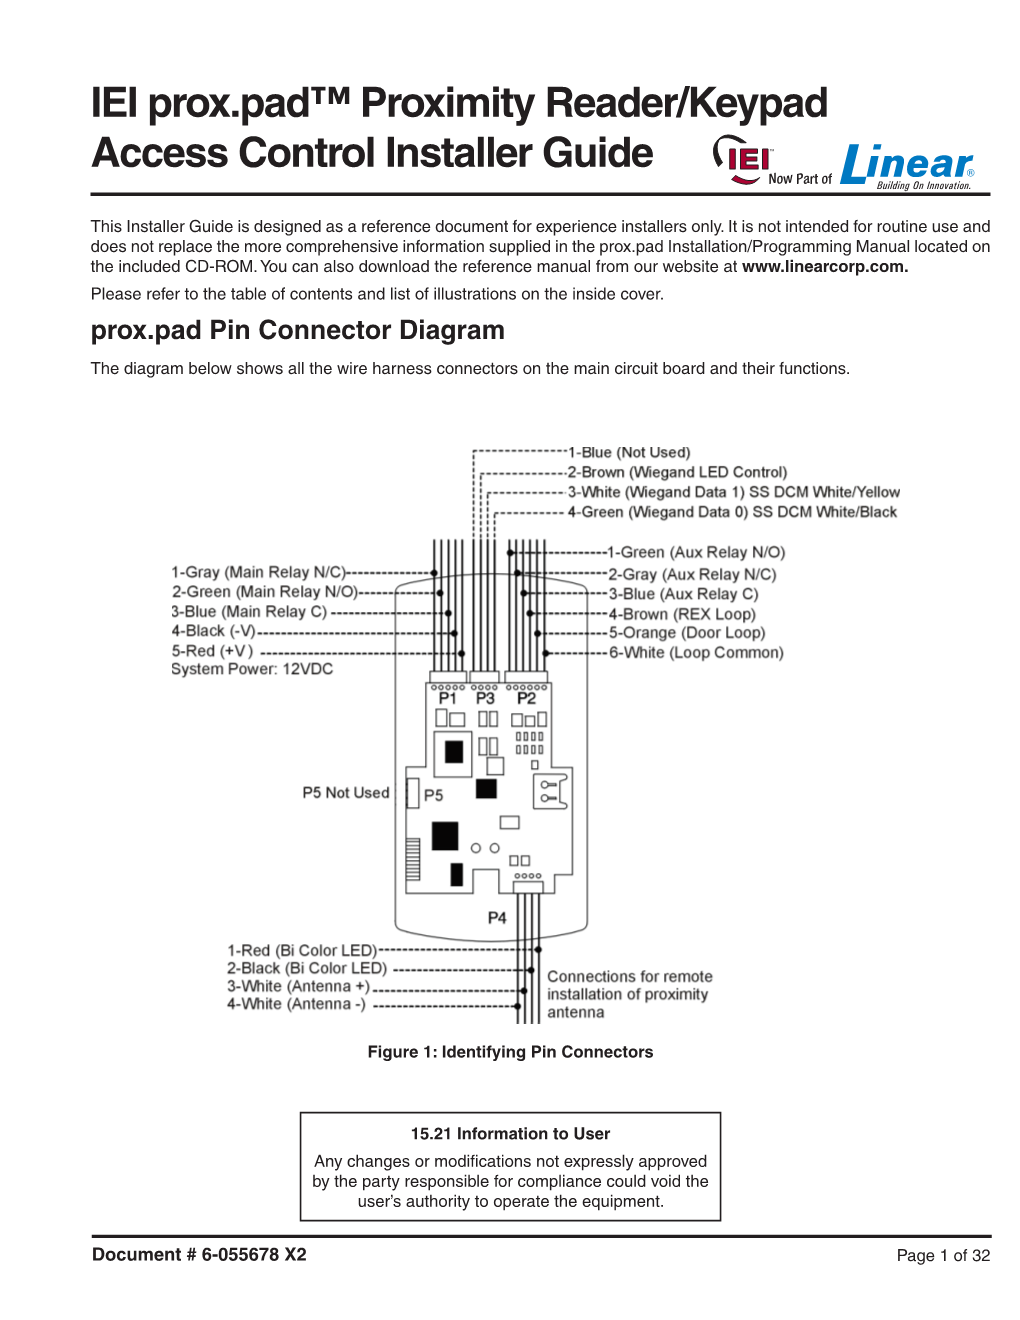 IEI Prox.Pad™ Proximity Reader/Keypad Access Control Installer Guide Now Part Of